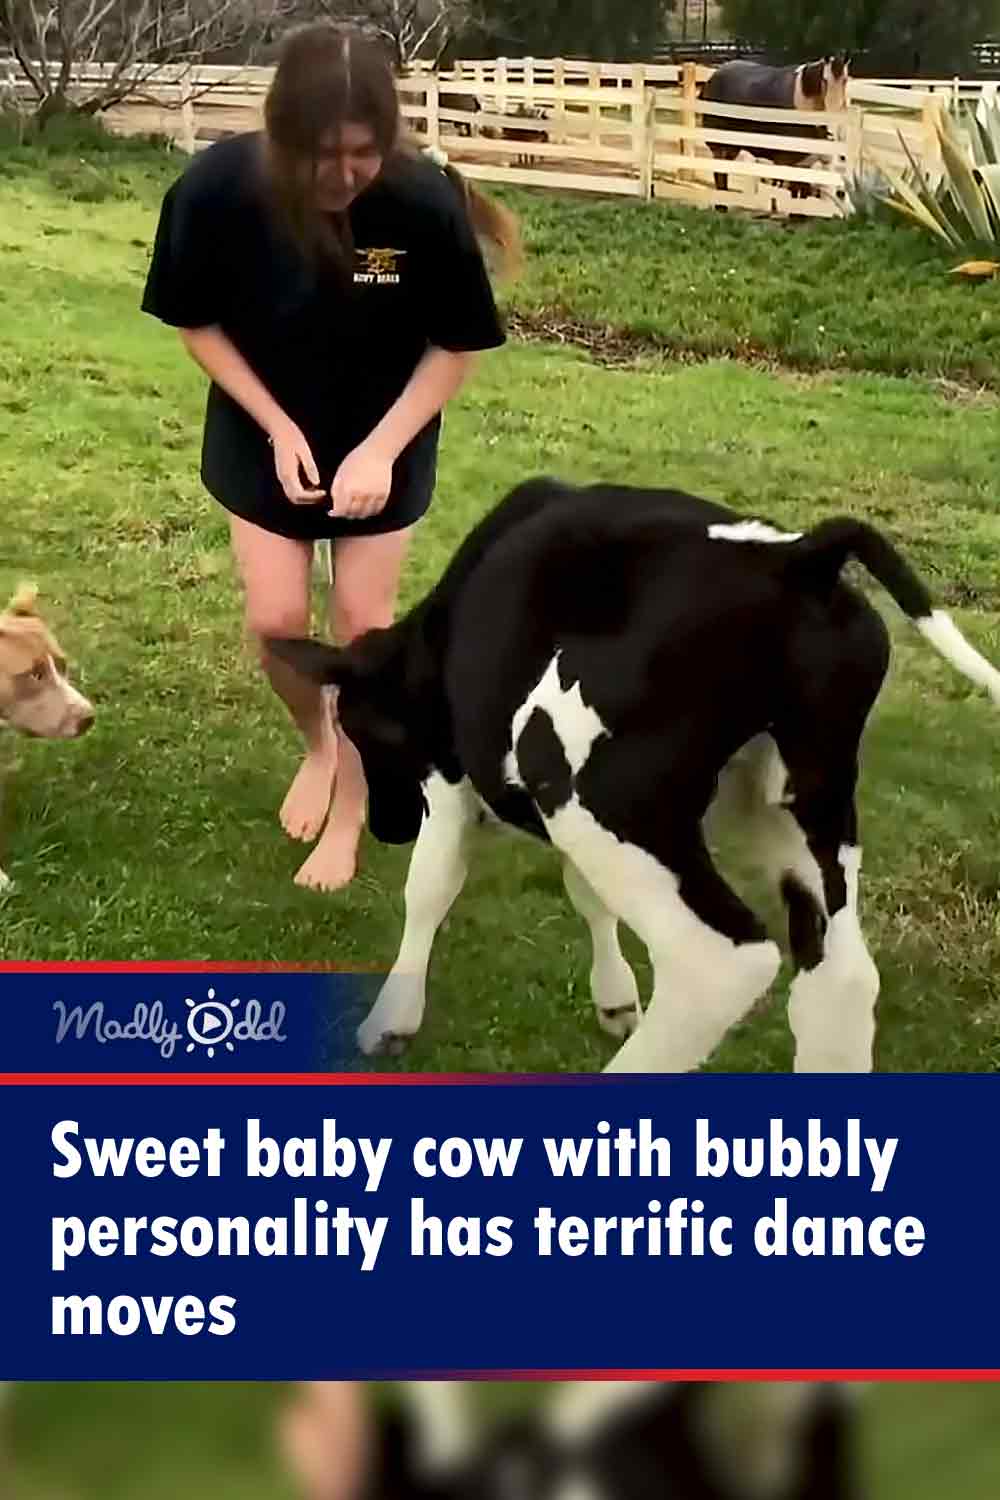 Sweet baby cow with bubbly personality has terrific dance moves